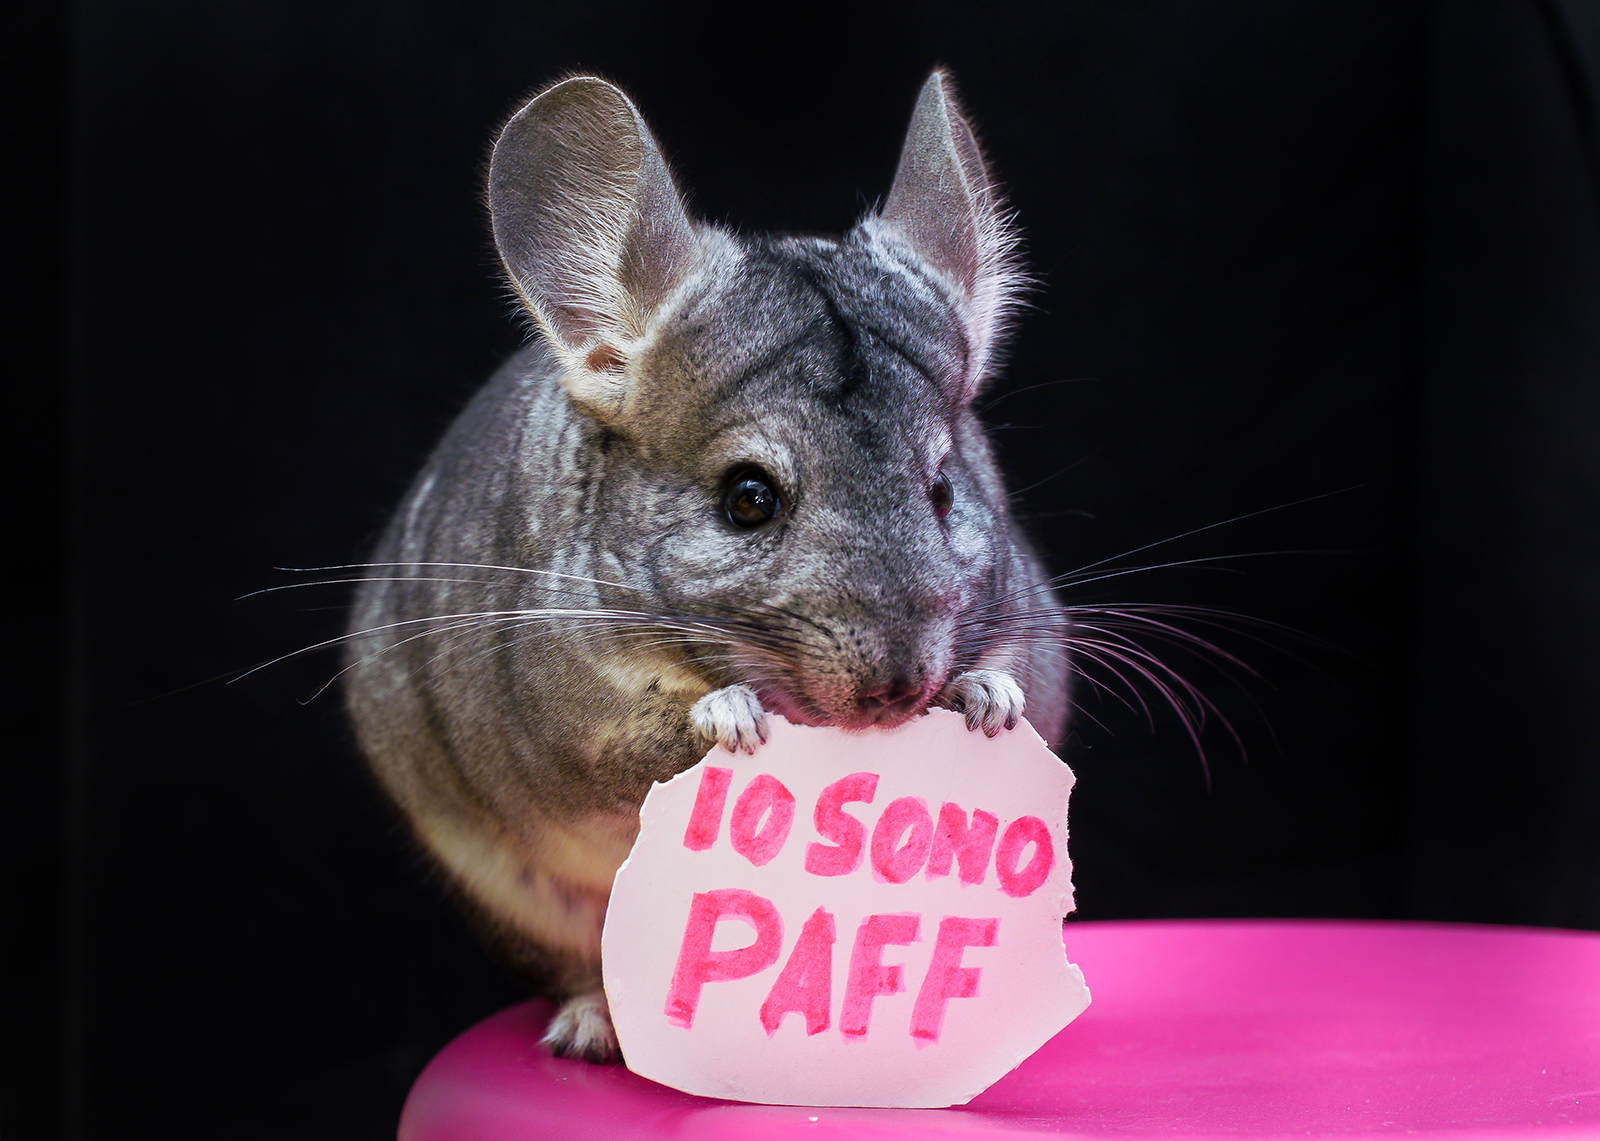 paff, the chinchilla my daughter....